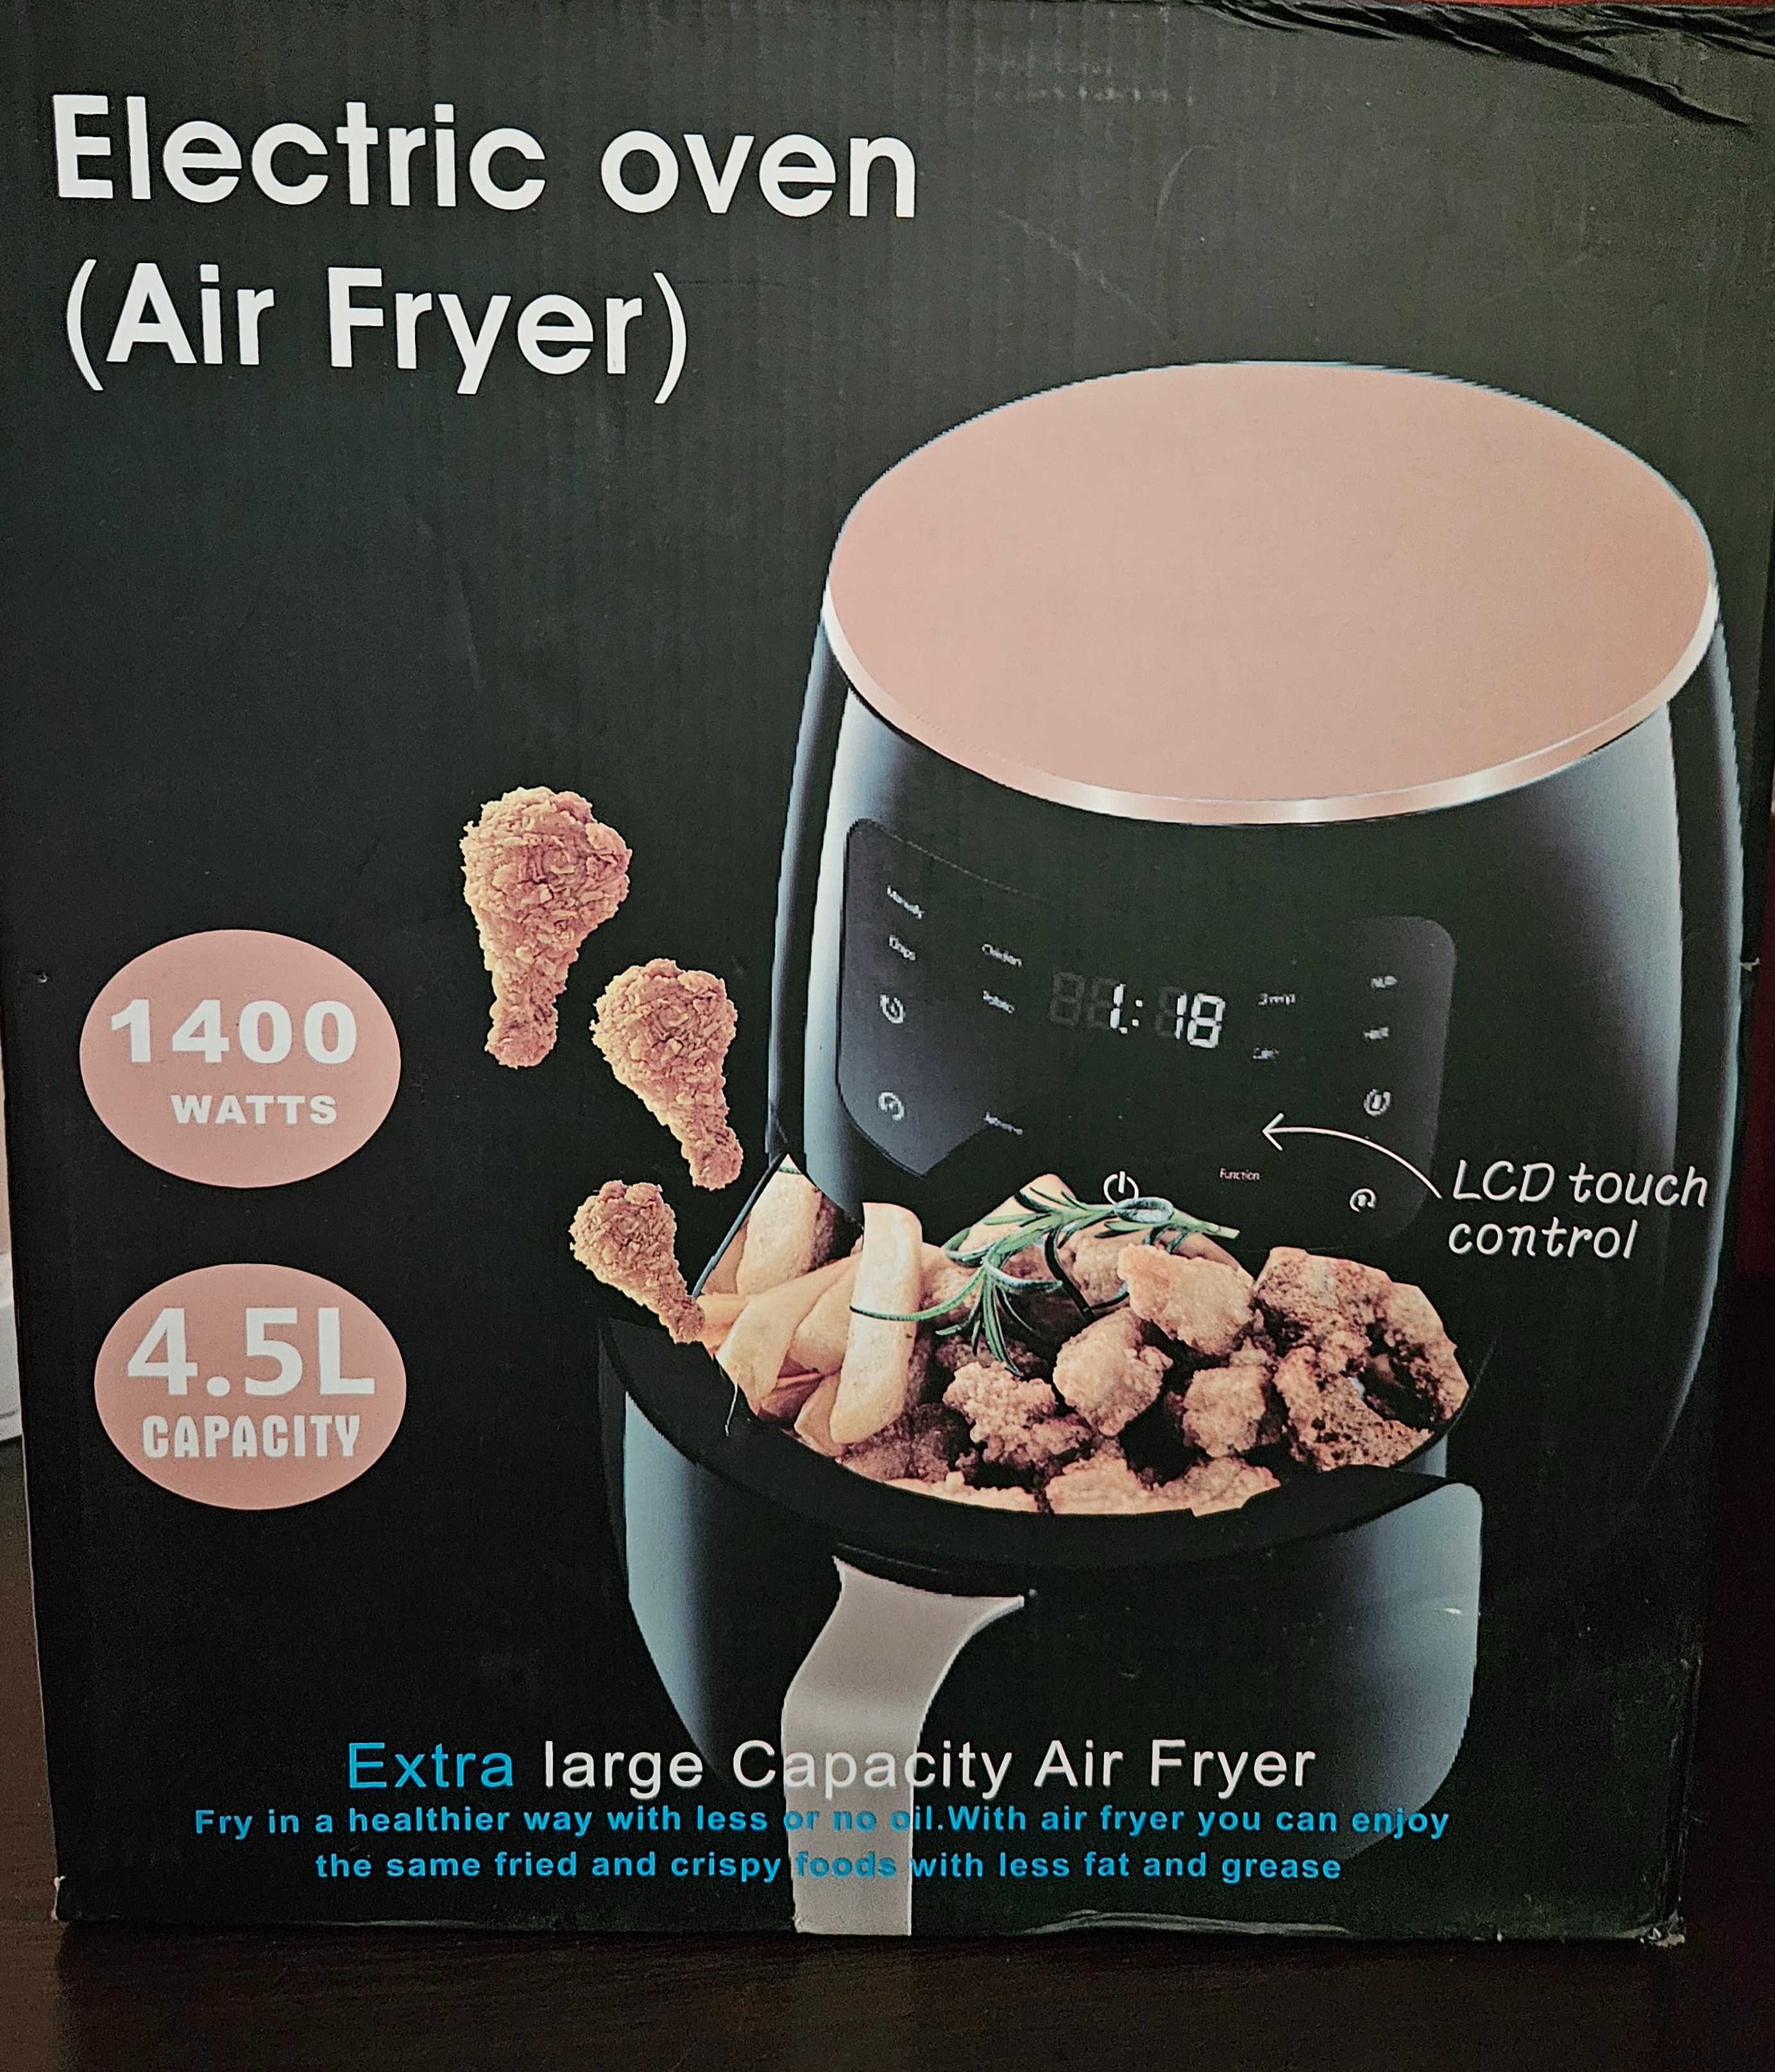 Air fryer ( Electric oven )